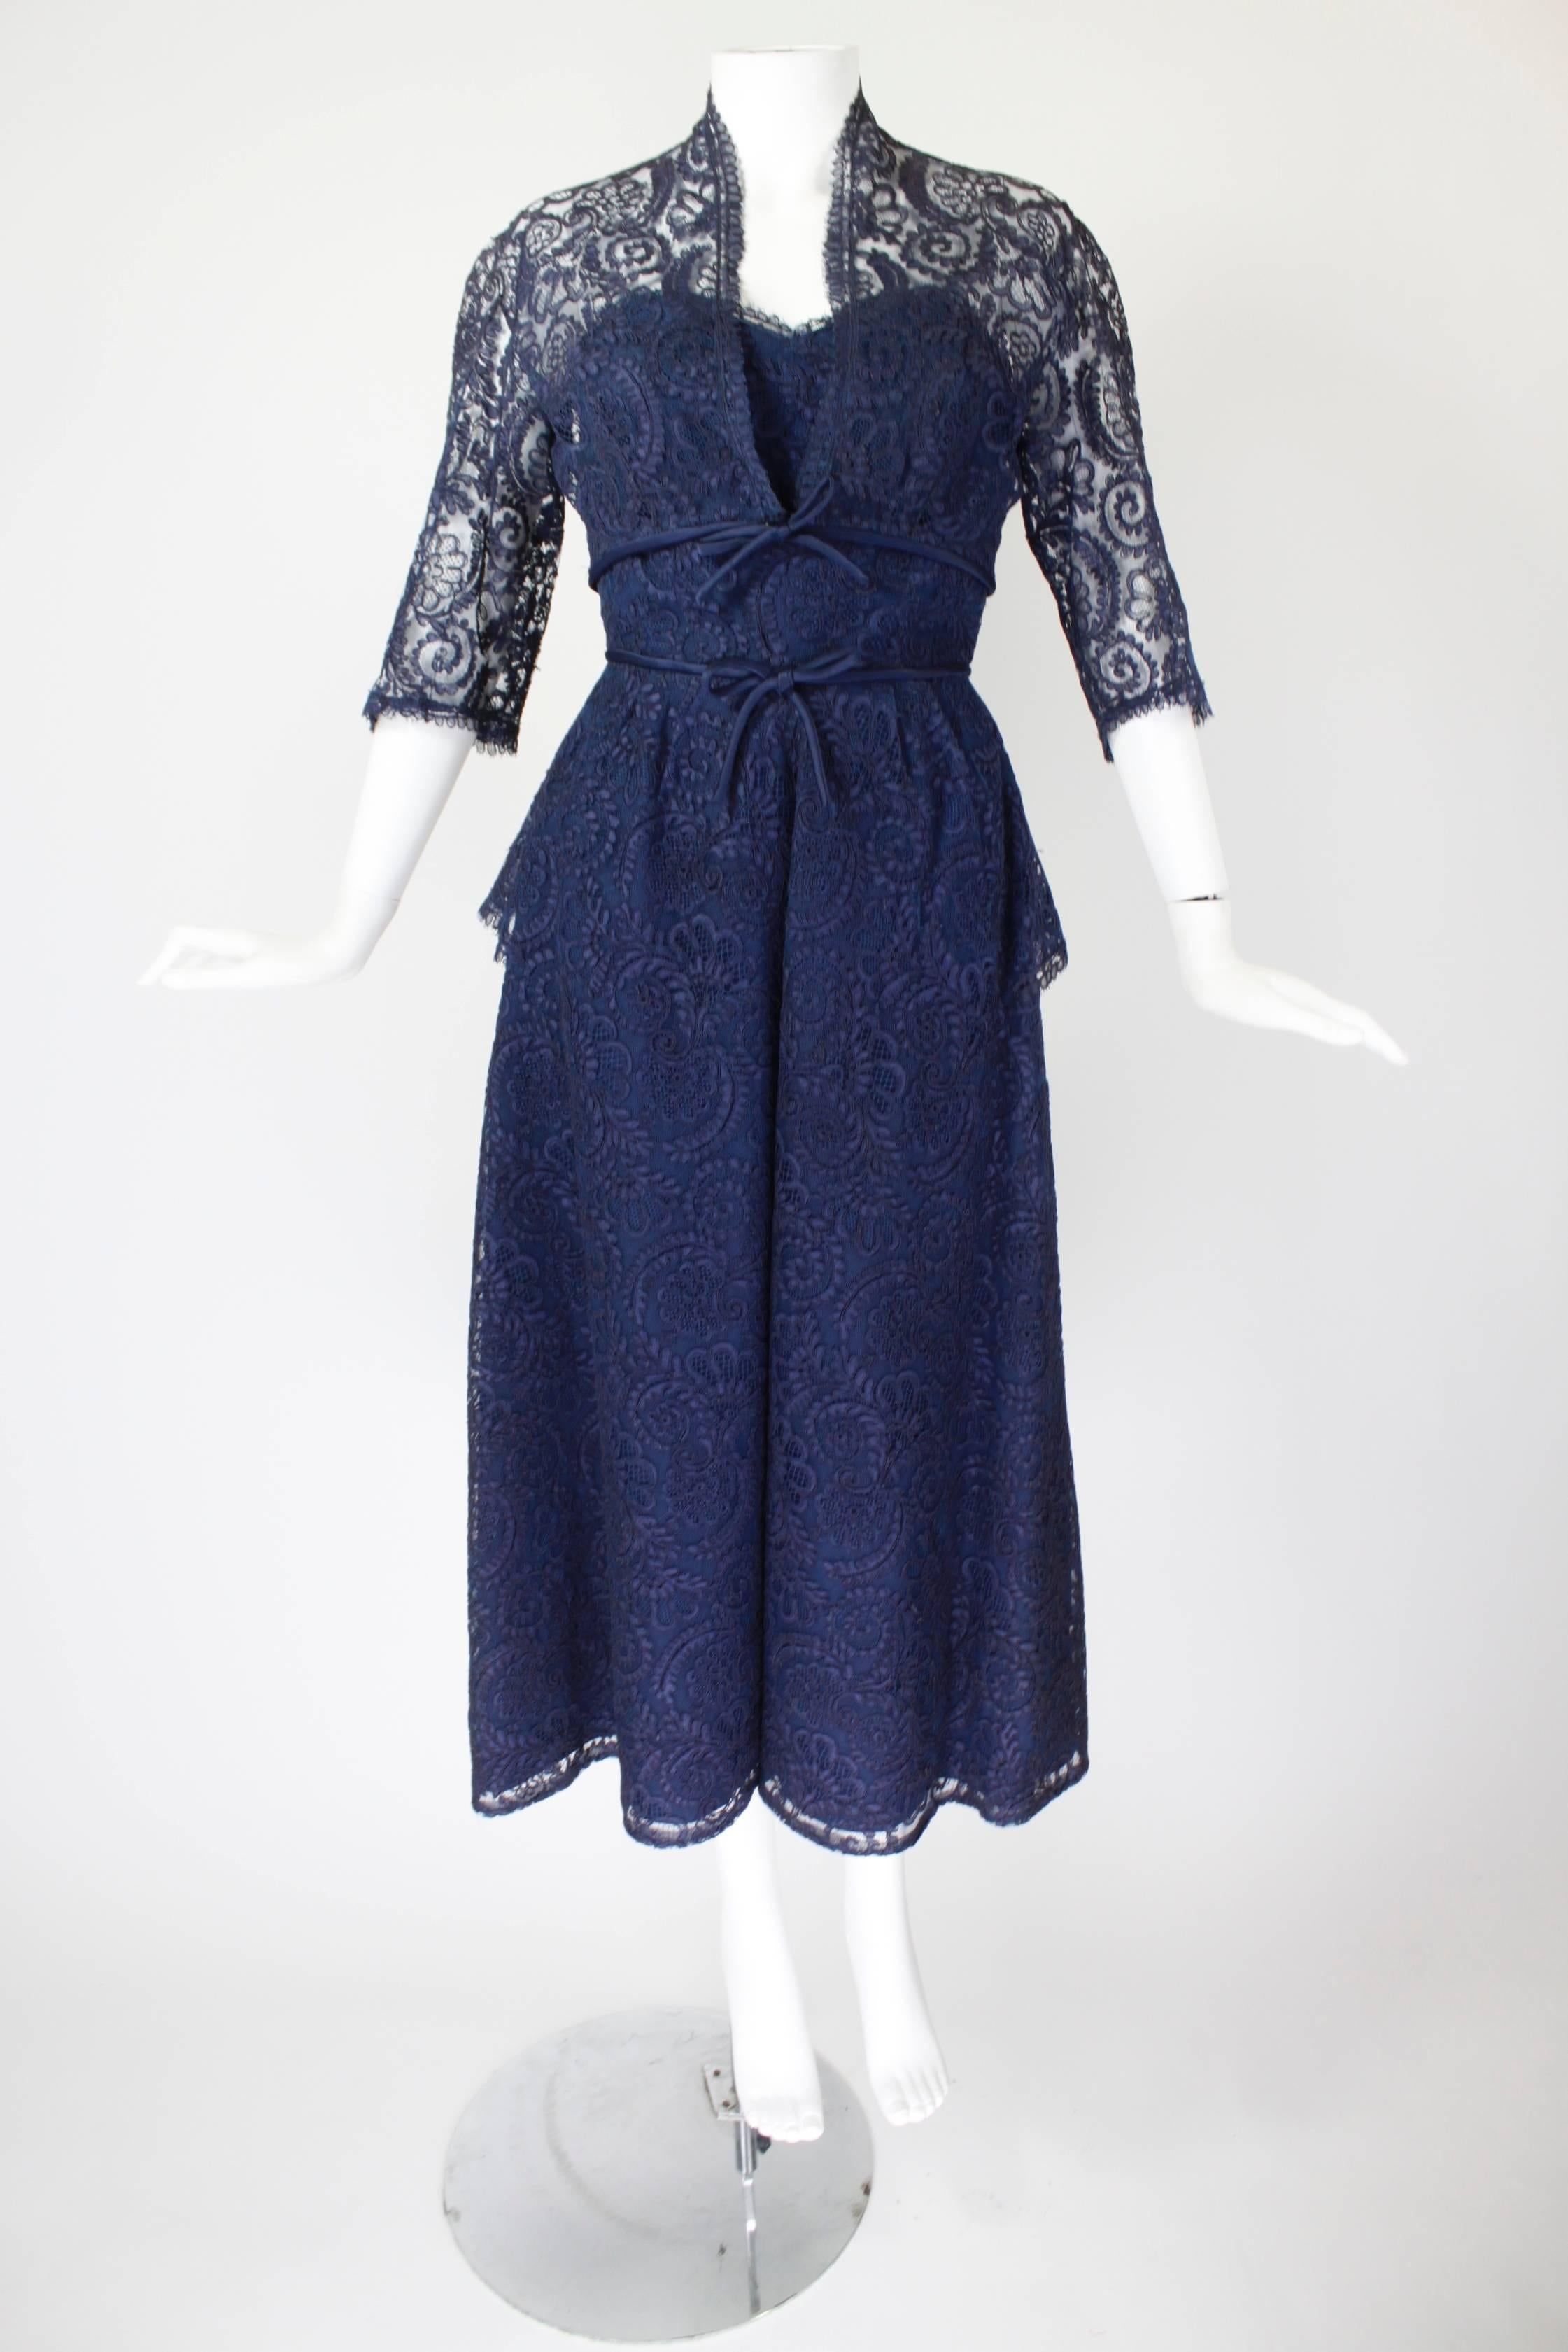 Done in gorgeous navy blue guipure lace, this strapless Jean Desses cocktail dress features a nipped waist, full skirt, and sweetheart neckline. The waist has a peplum on either side of the hip. A matching 3/4 length sleeve bolero compliments the